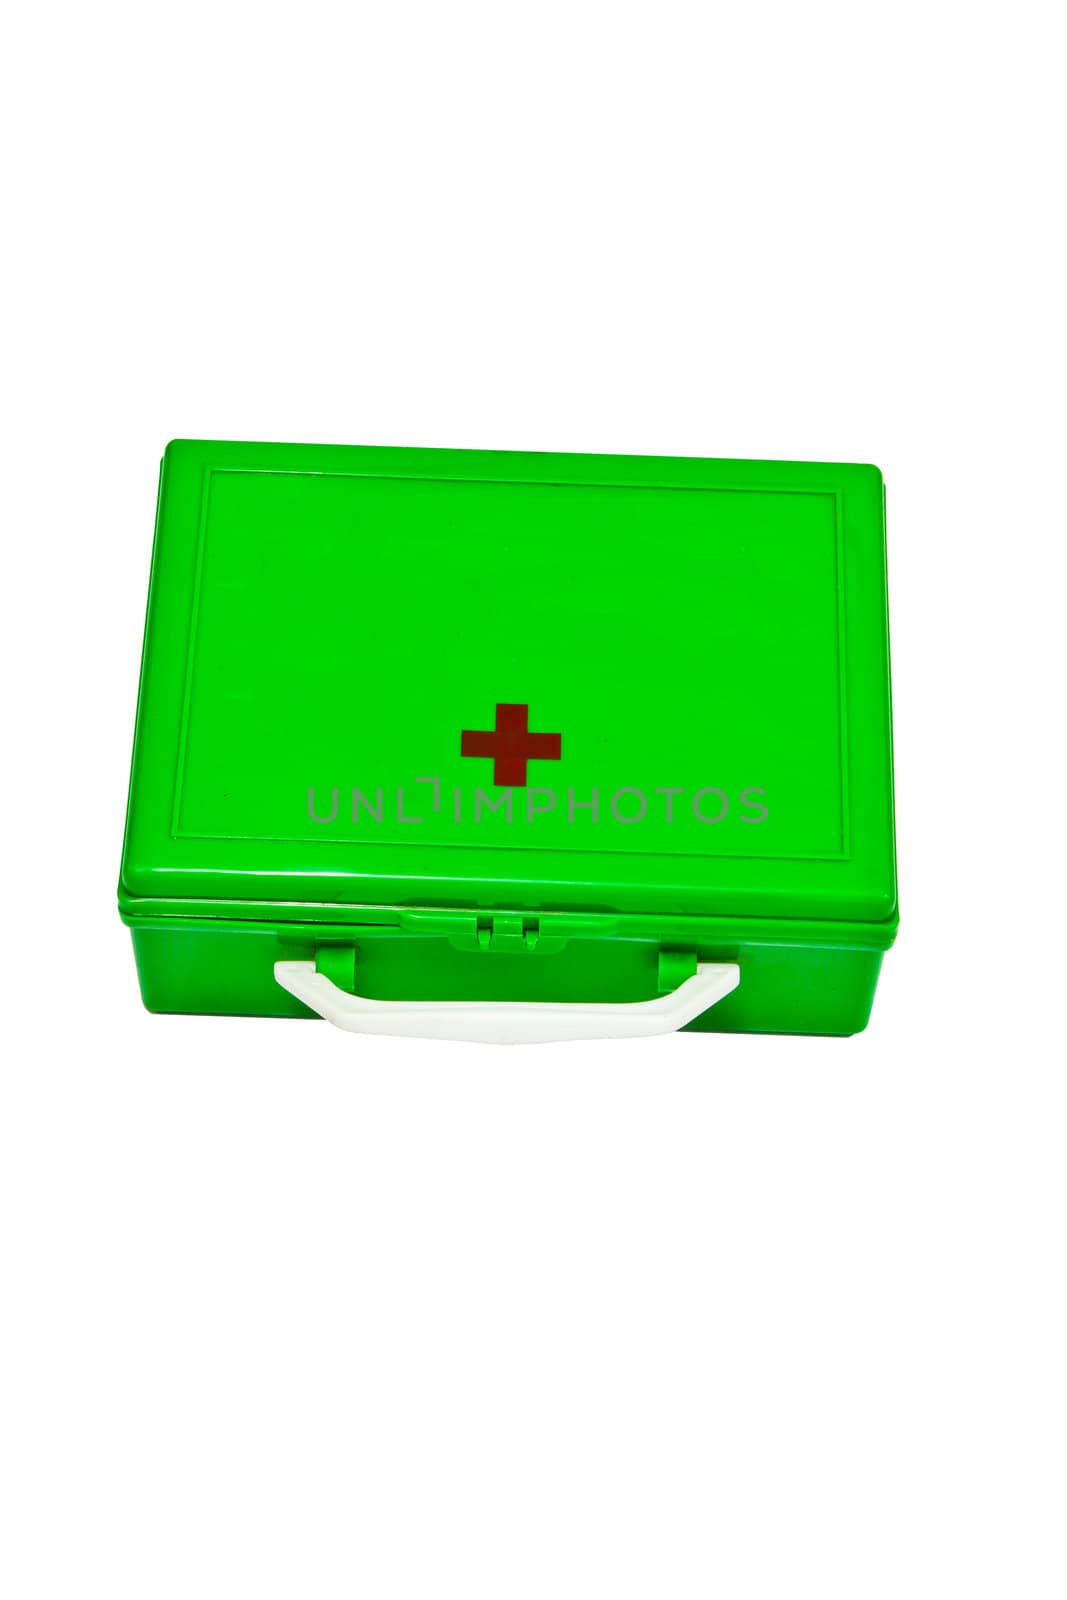 First aid box with white background